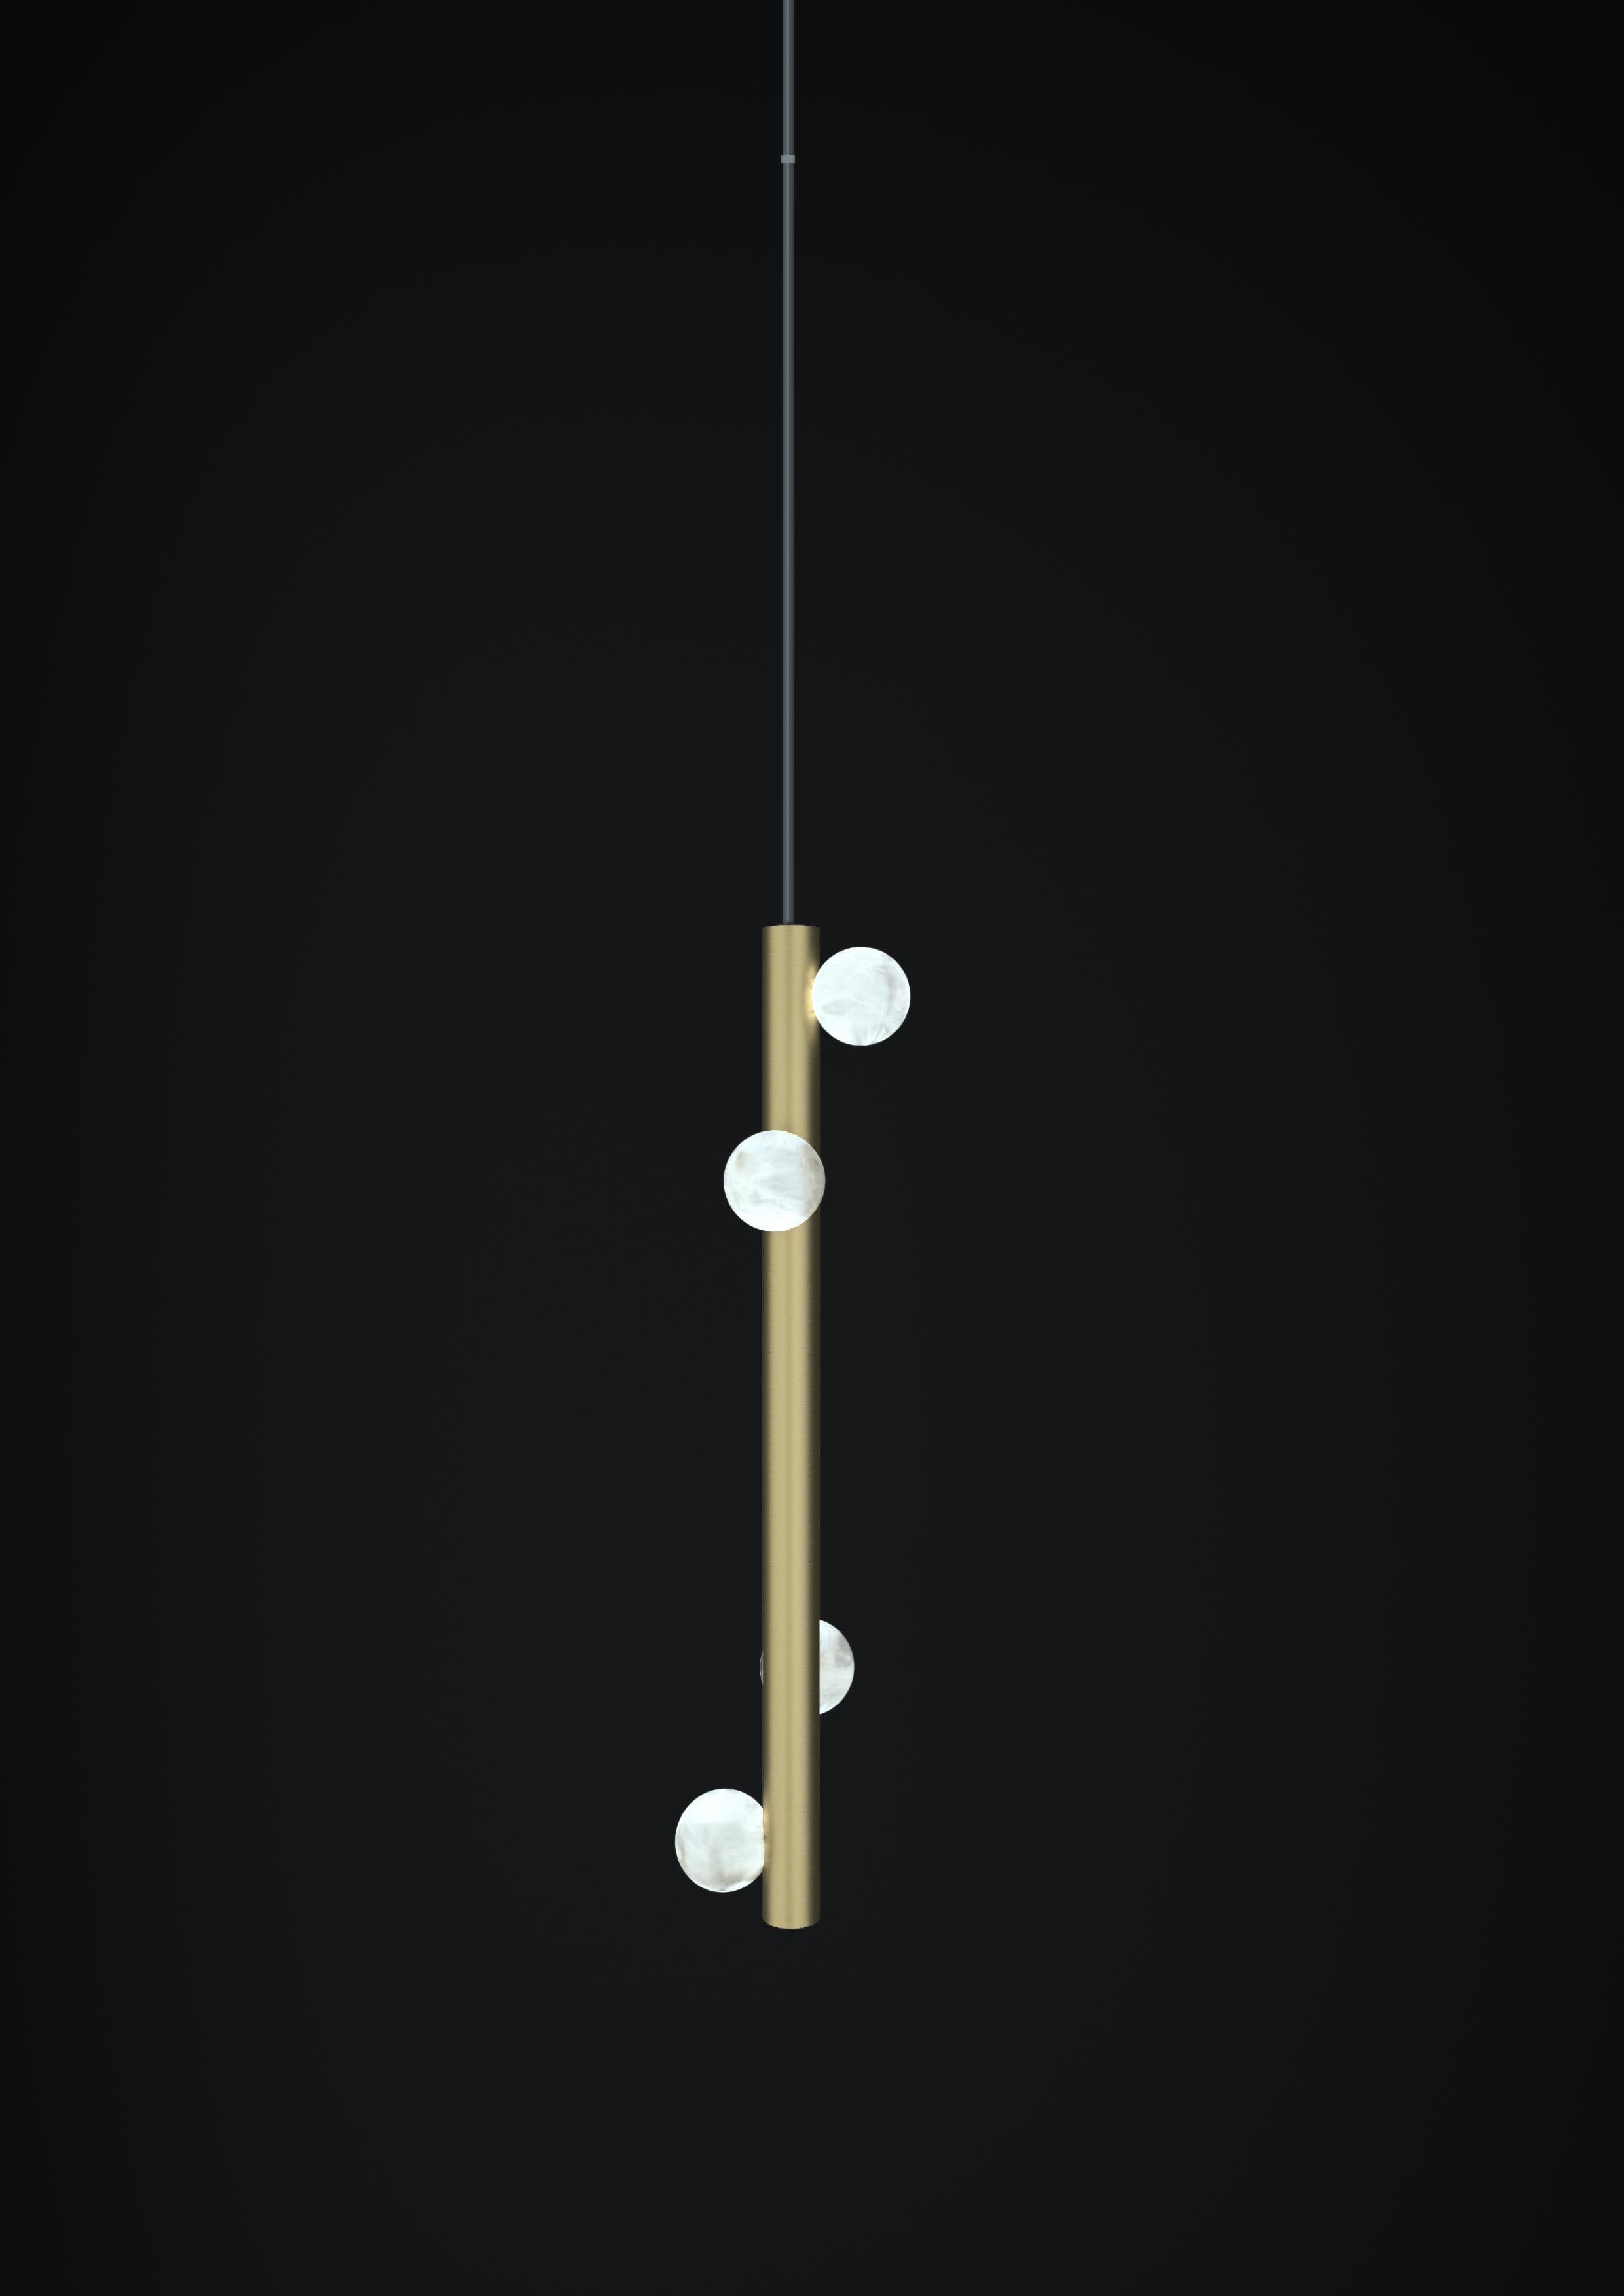 Demetra Brushed Brass Pendant Lamp 2 by Alabastro Italiano
Dimensions: D 12 x W 12 x H 60 cm.
Materials: White alabaster and brushed brass.

Available in different finishes: Shiny Silver, Bronze, Brushed Brass, Ruggine of Florence, Brushed